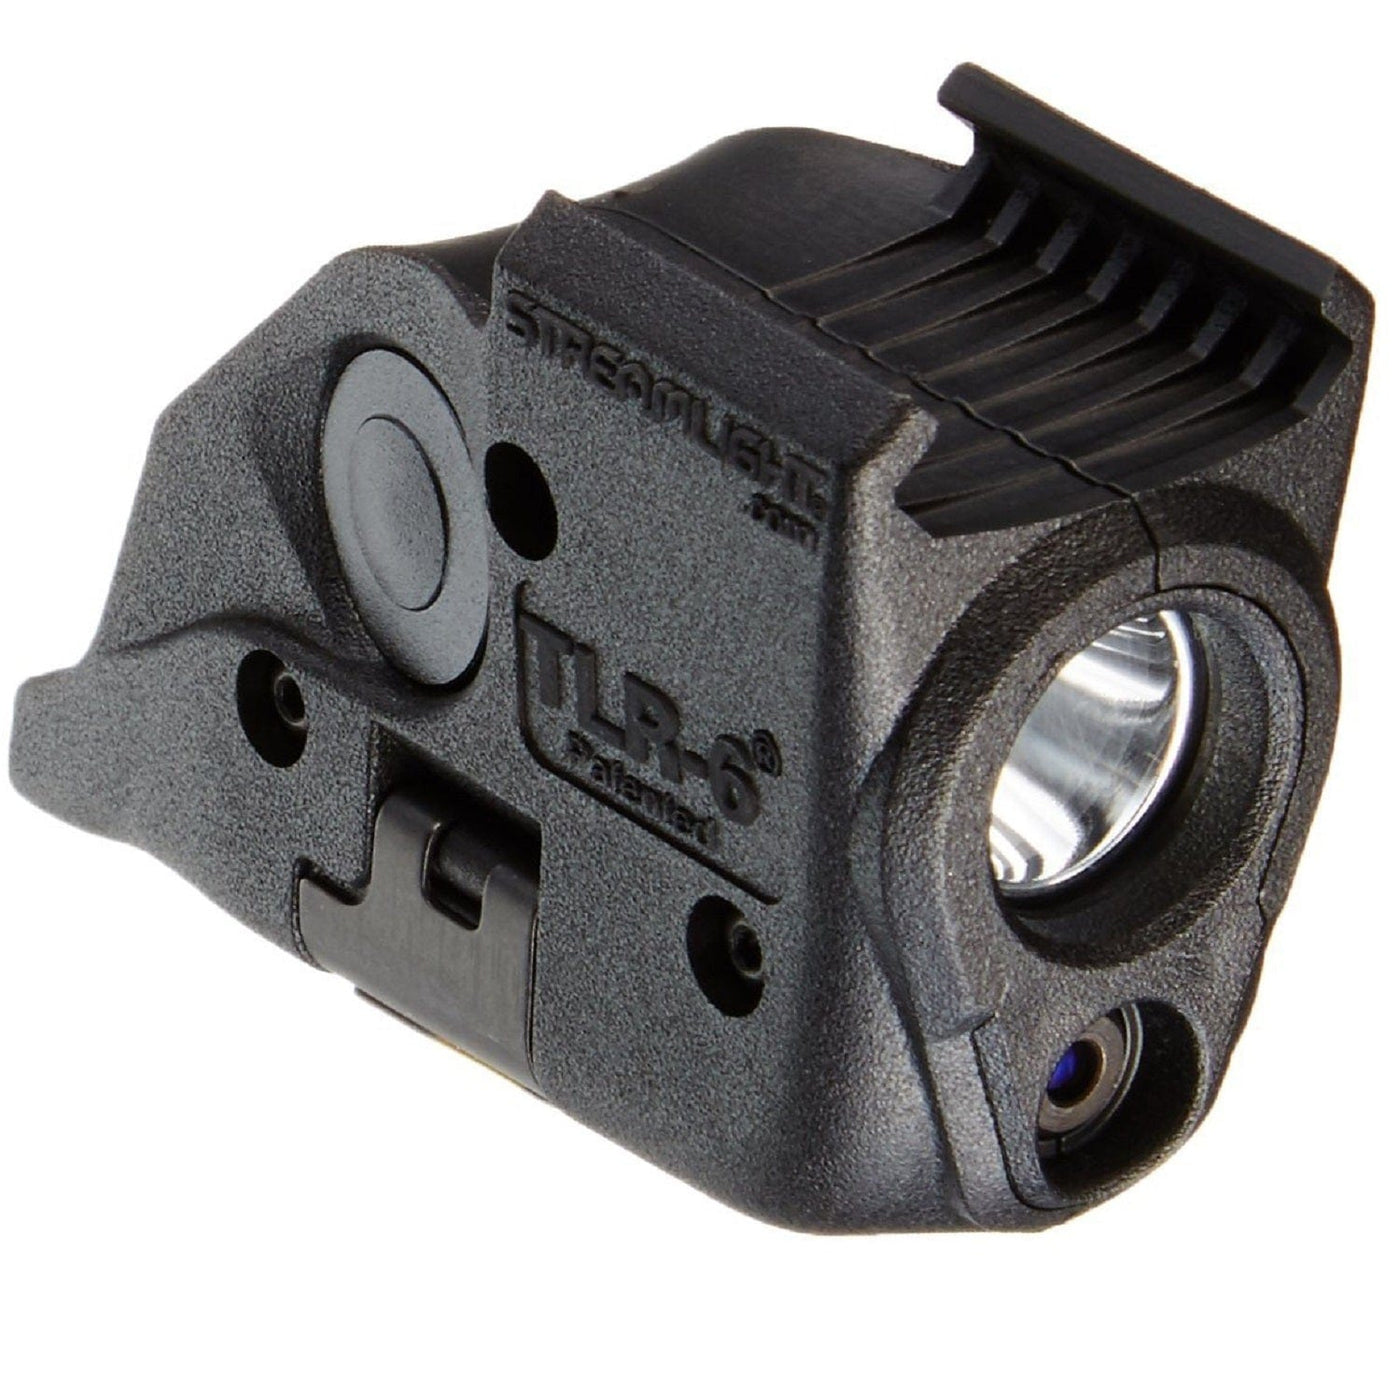 Streamlight Streamlight TLR-6 Rail Mount for Smith and Wesson Flashlight Lights